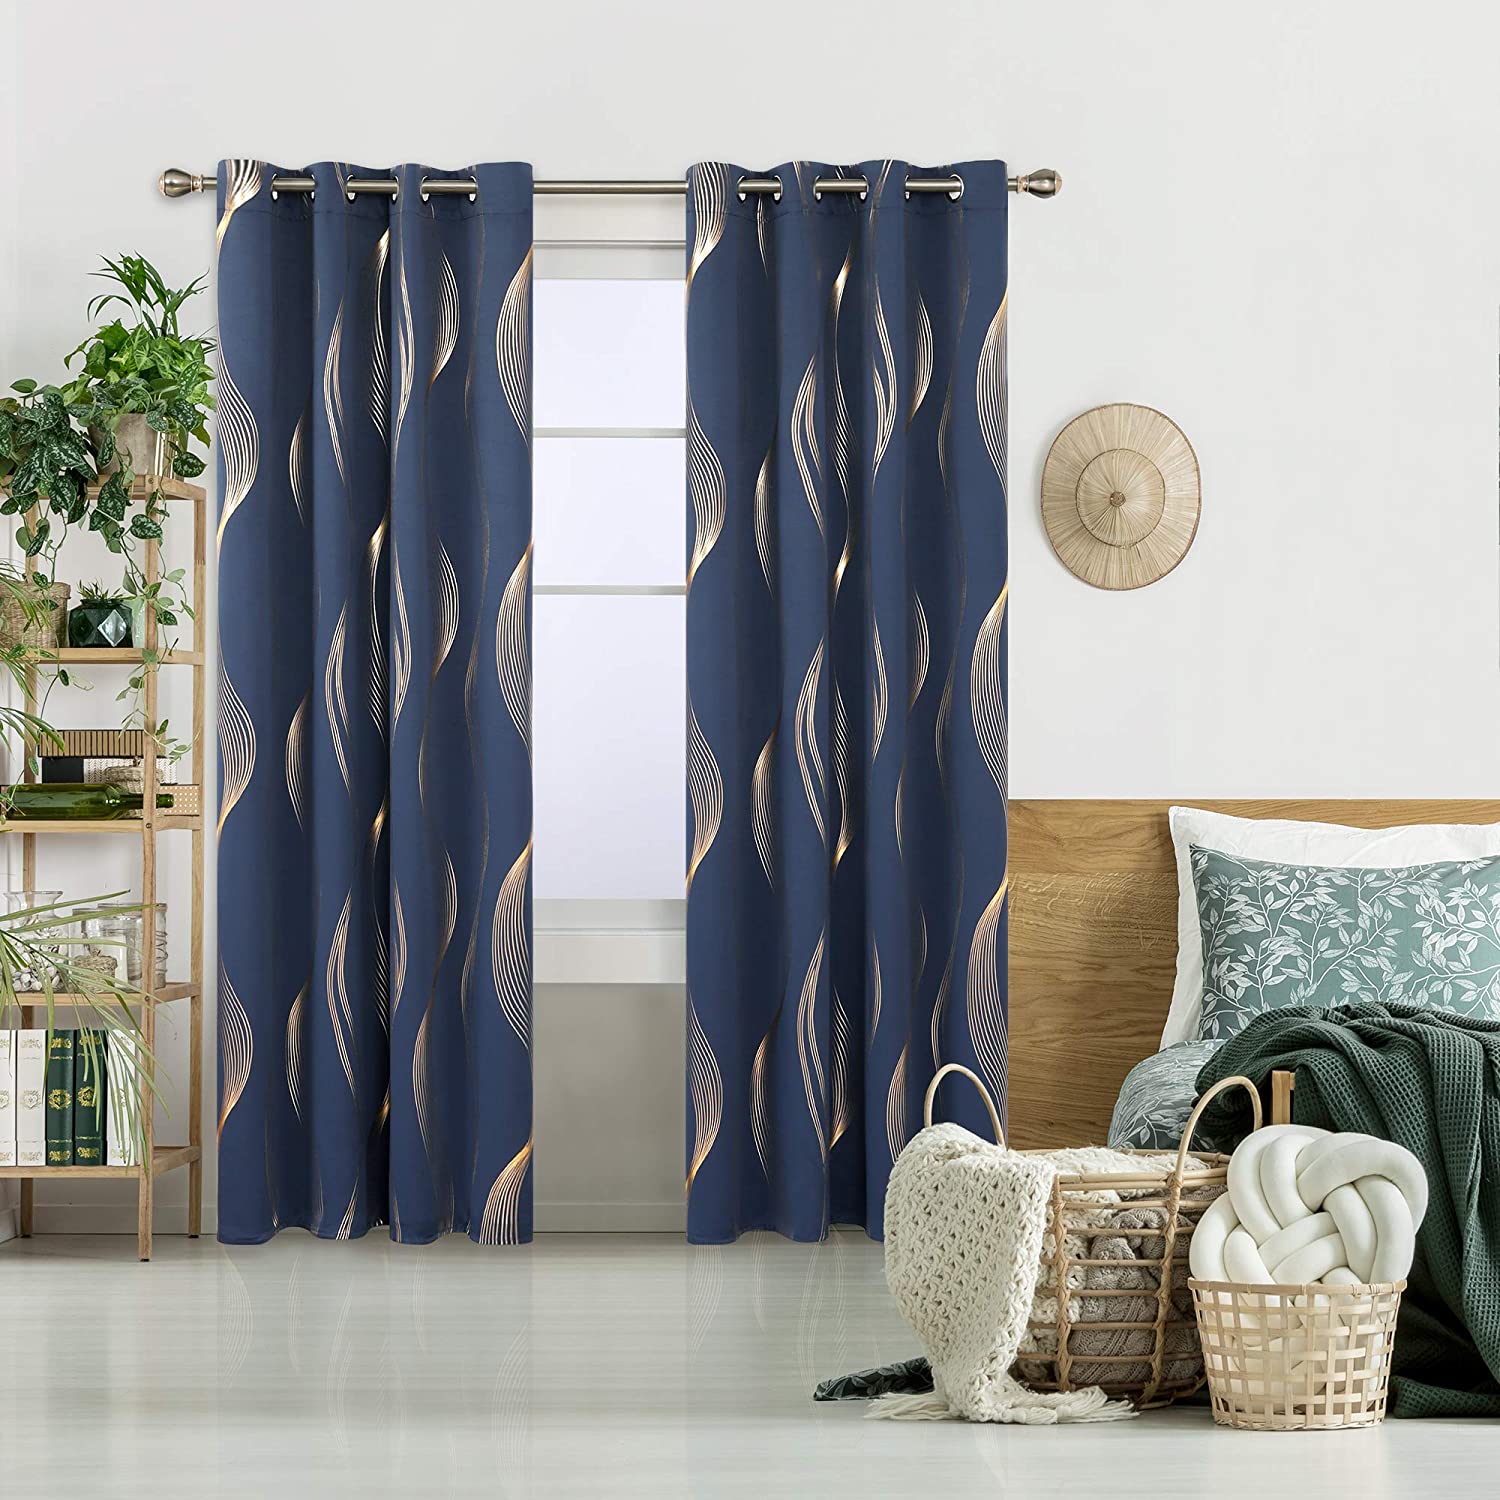 Introduction to Double Layer Curtains